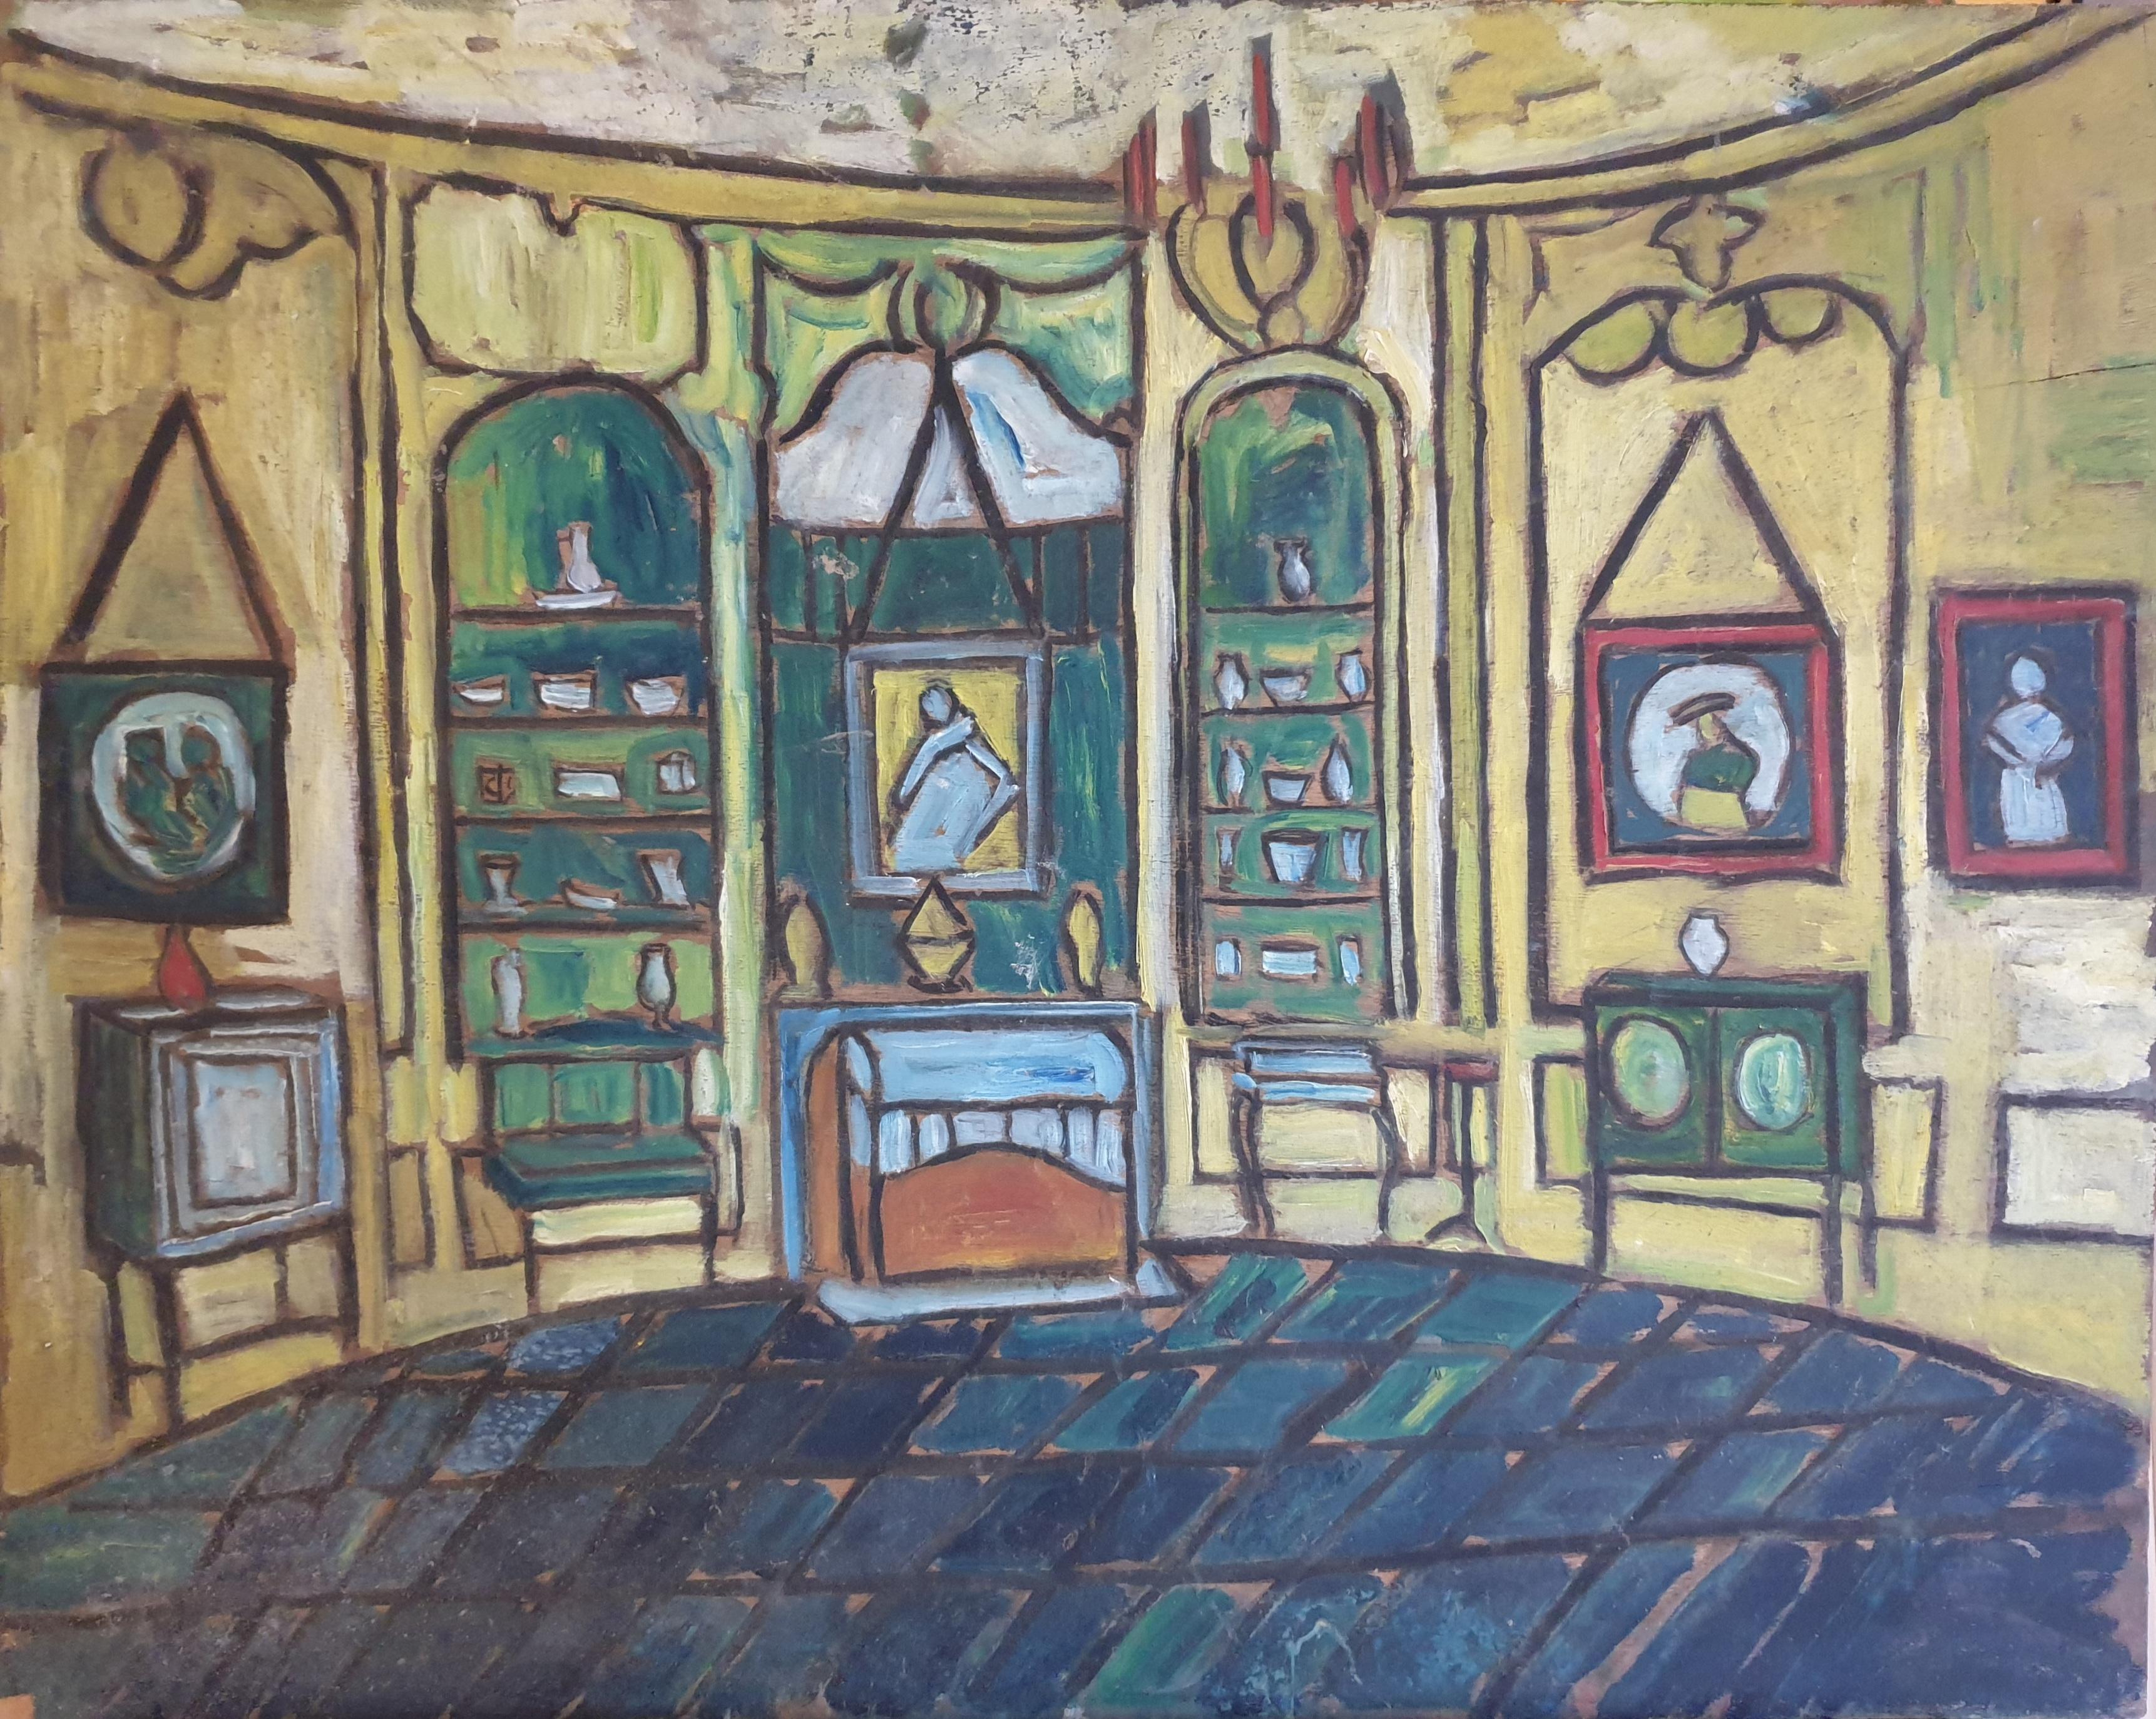 Extremely charming naiive interpretation of a French Chateau salon interior.

Highly colourful and appealing in its simple rendering of the paintings, furniture, boiserie and objets d'art in the room.

There is a long tradition of artists capturing